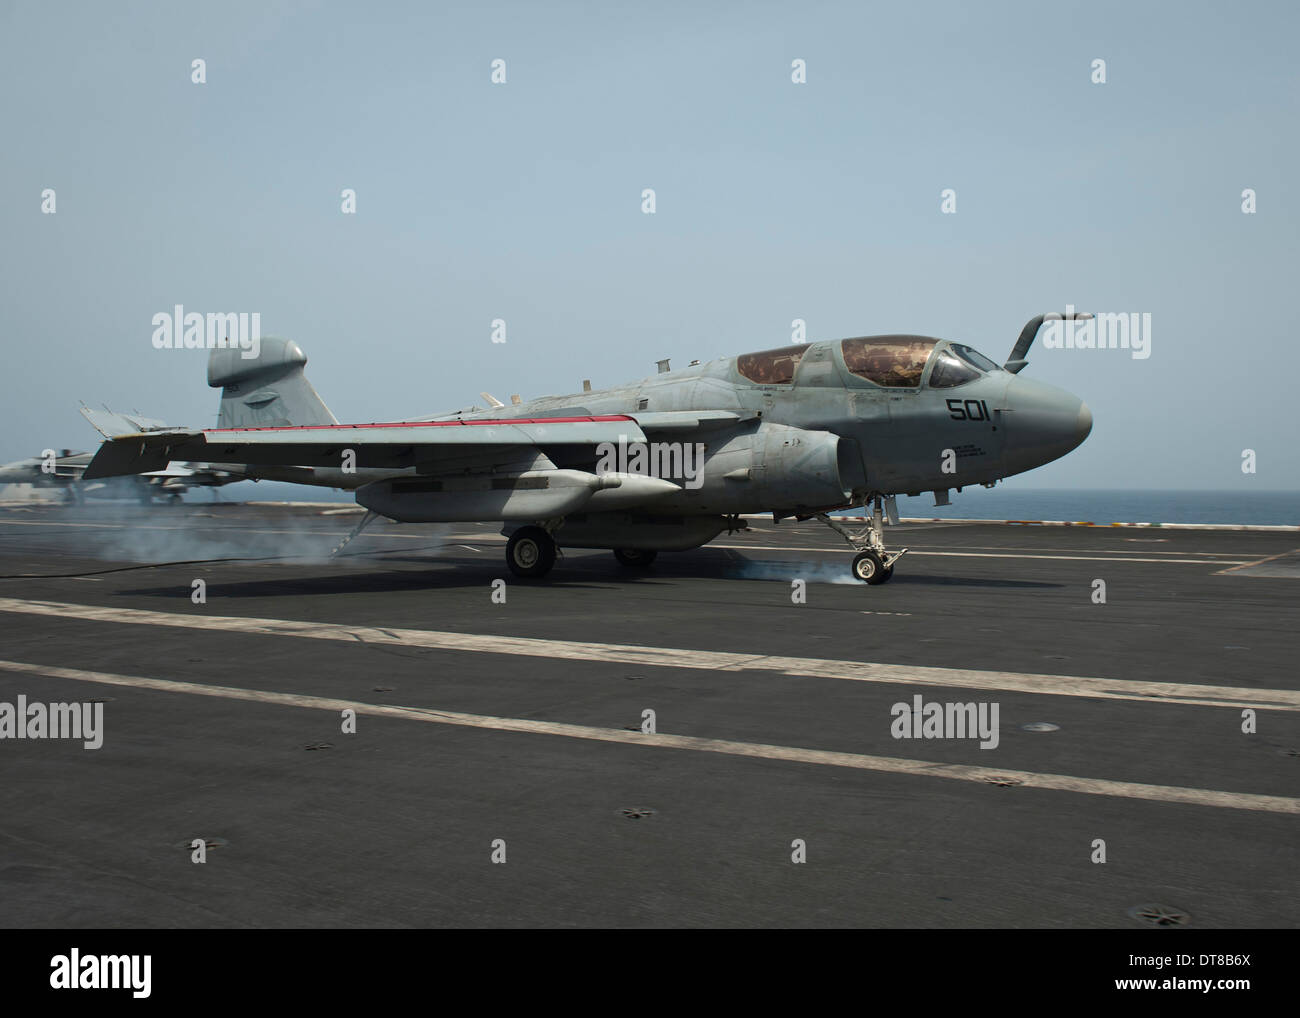 Gulf of Oman, June 15, 2013 - An EA-6B Prowler lands on the flight deck of the aircraft carrier USS Nimitz. Stock Photo